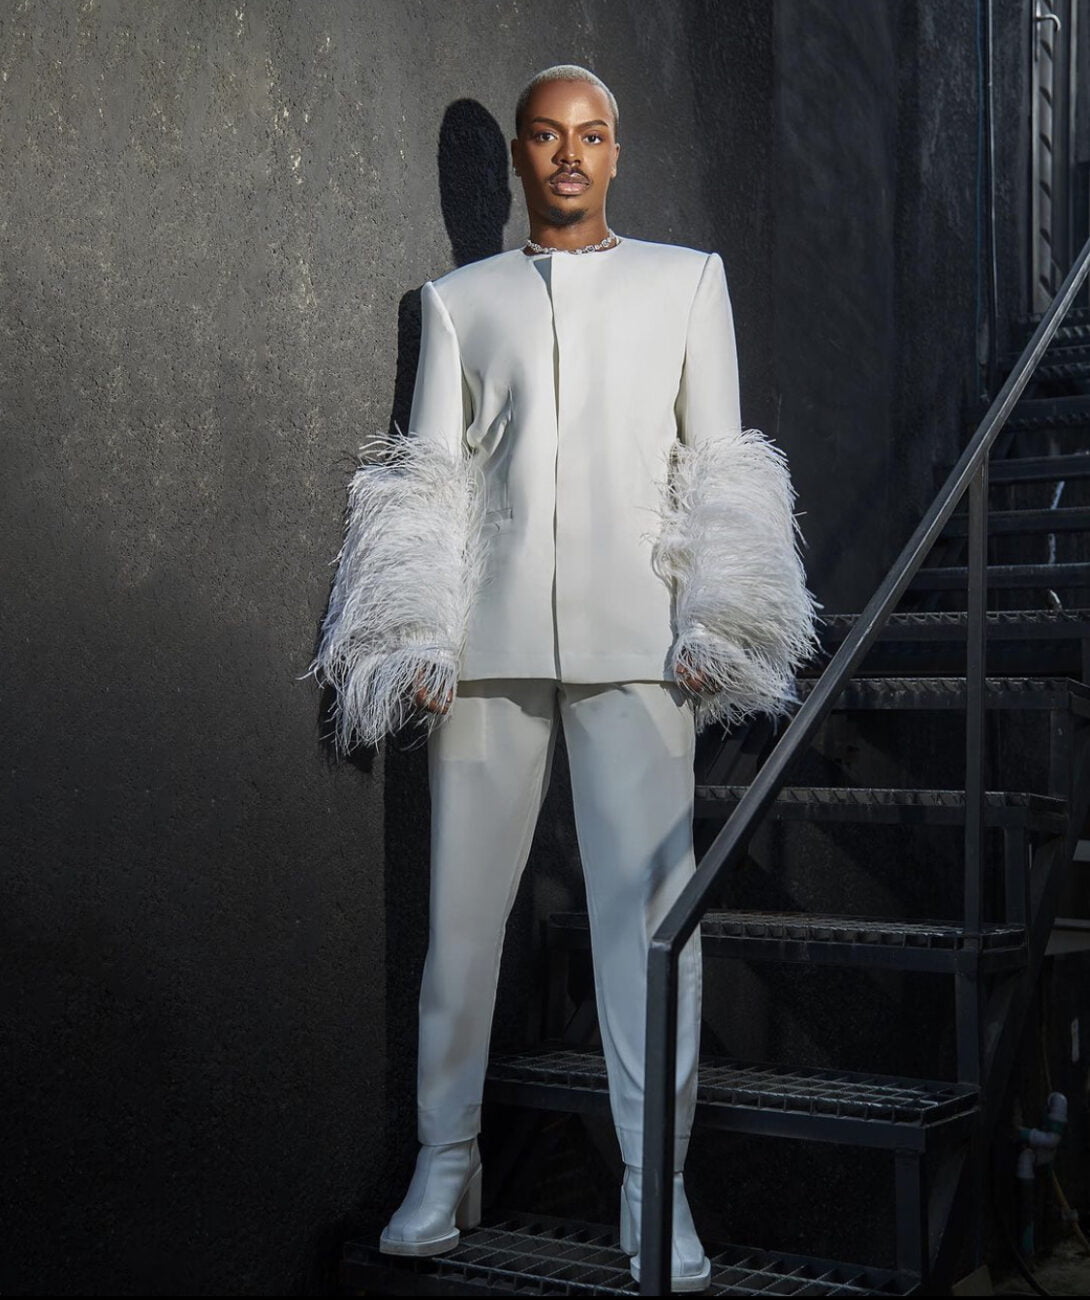 Enioluwa Adeoluwa in a dystopian society inspired white suit with feathers on the sleeves. 